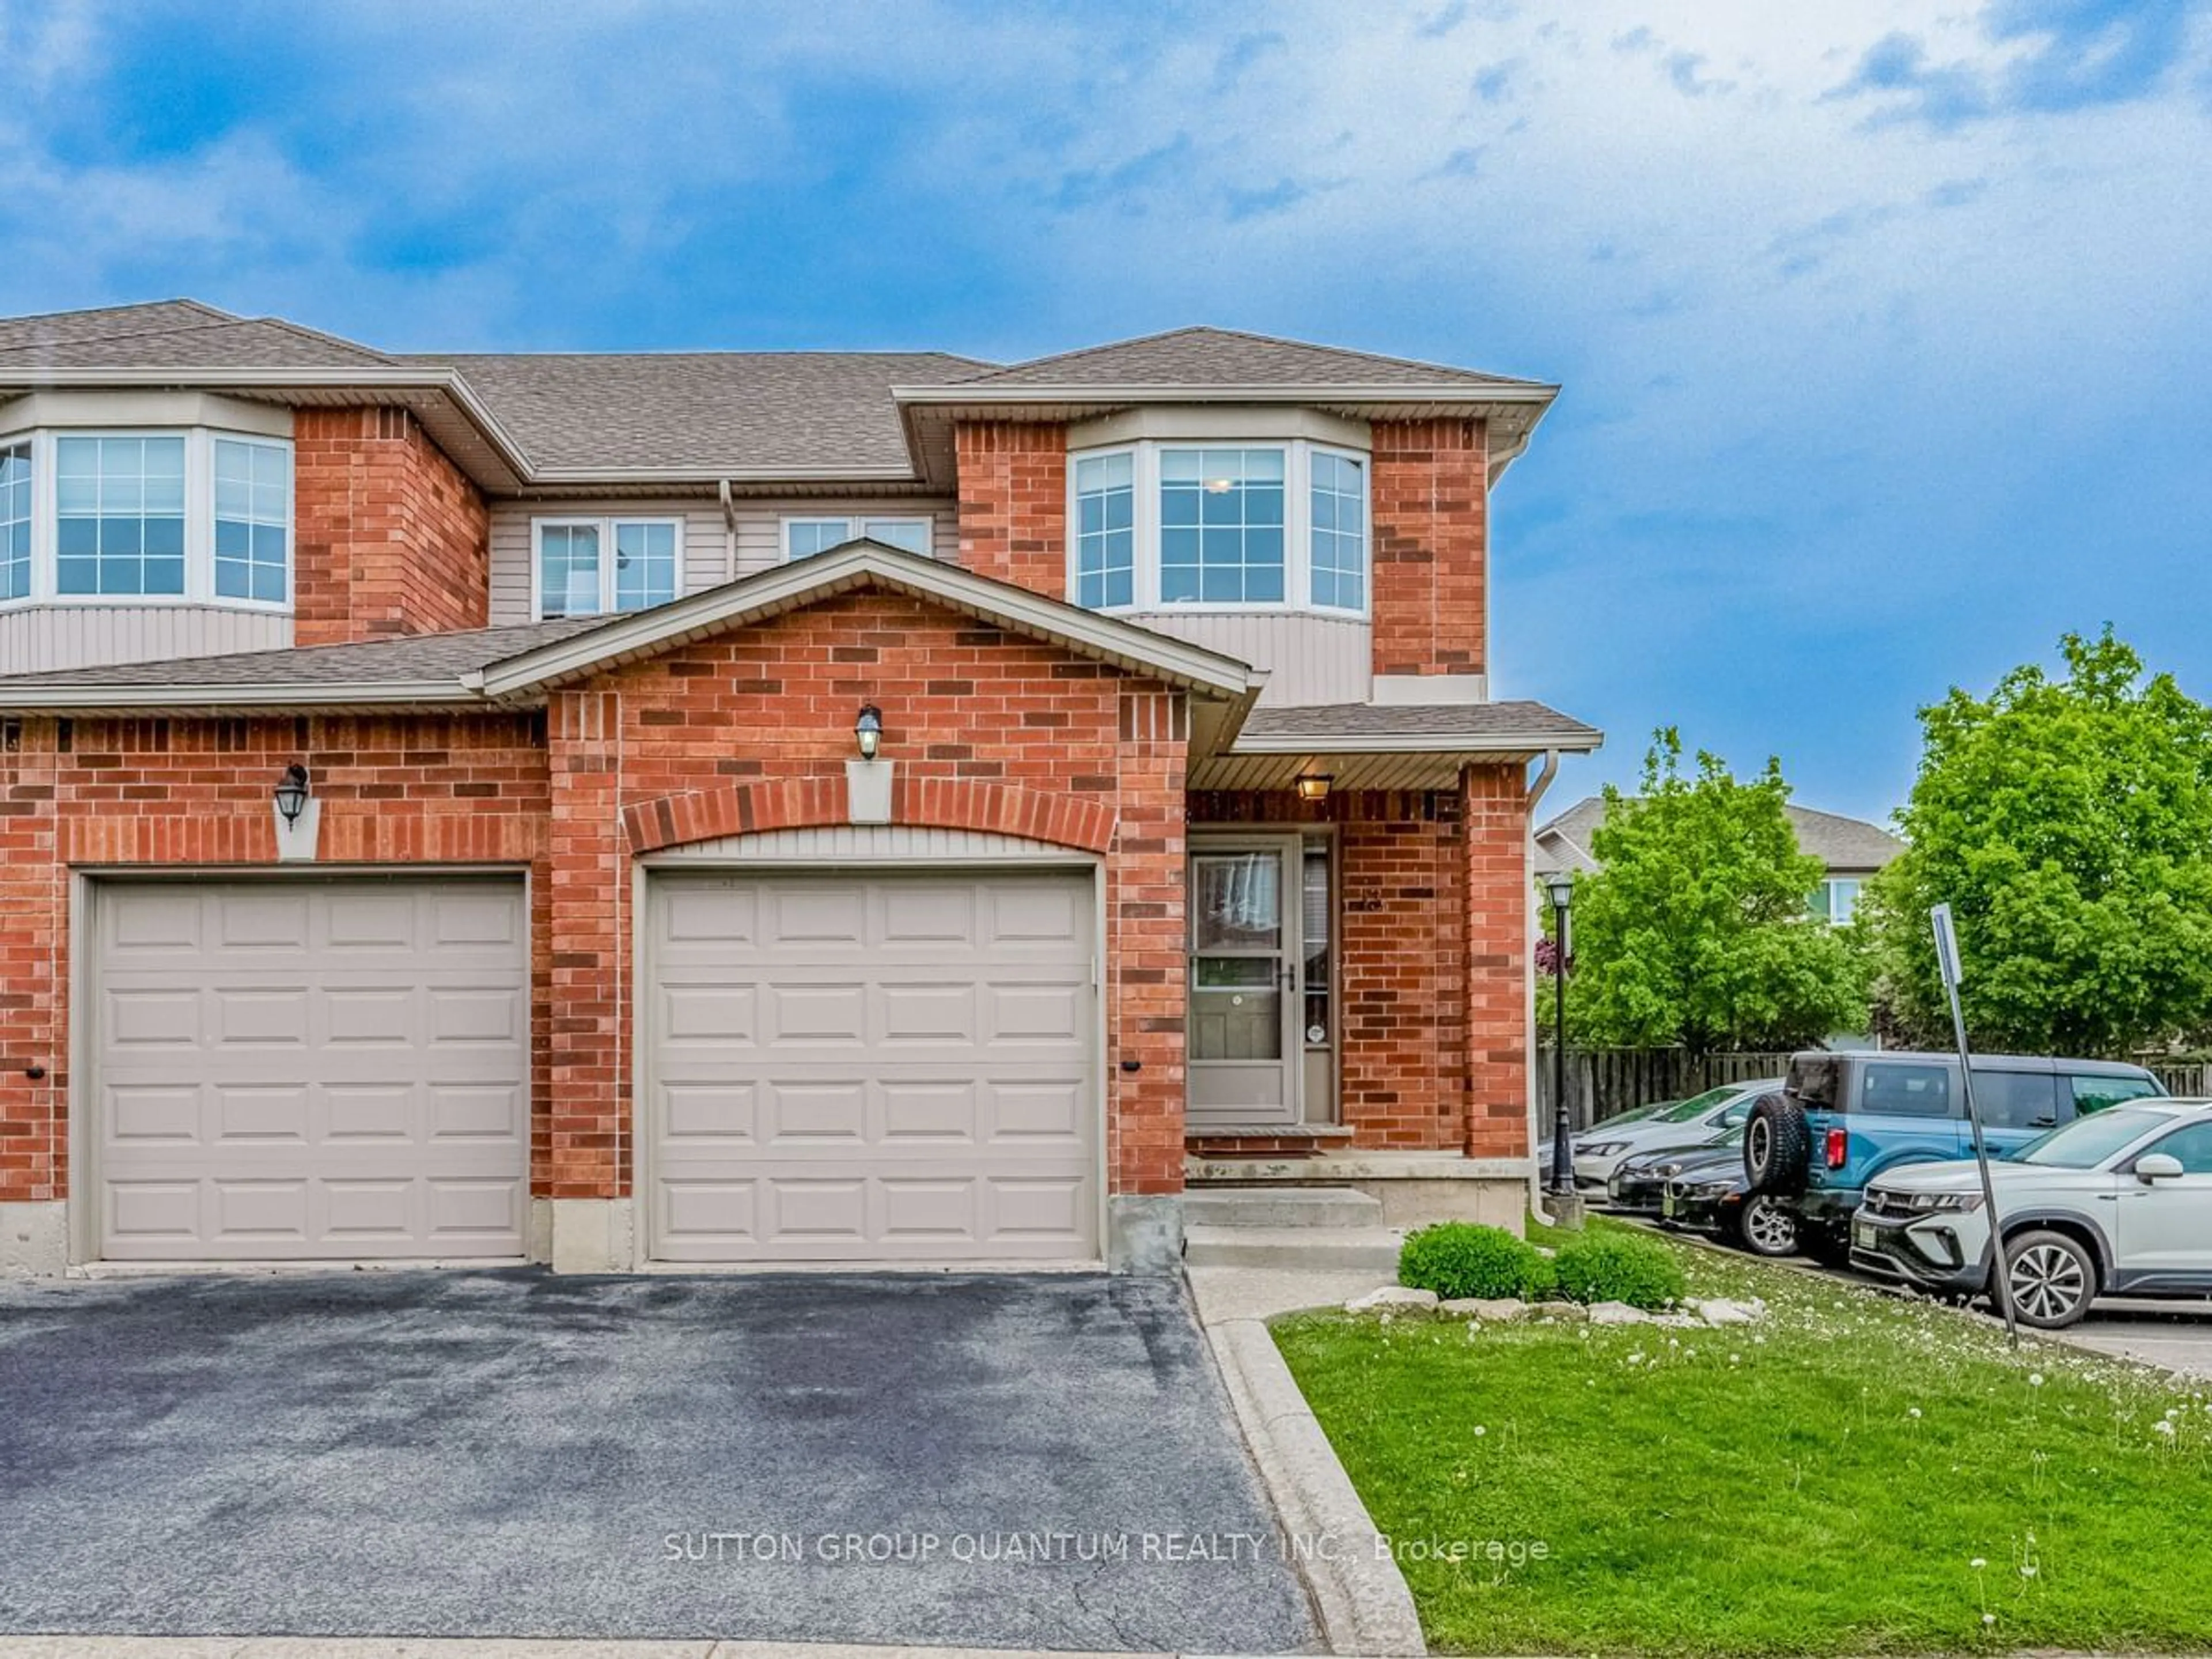 Home with brick exterior material for 174 Highbury Dr #13, Hamilton Ontario L8G 3T8